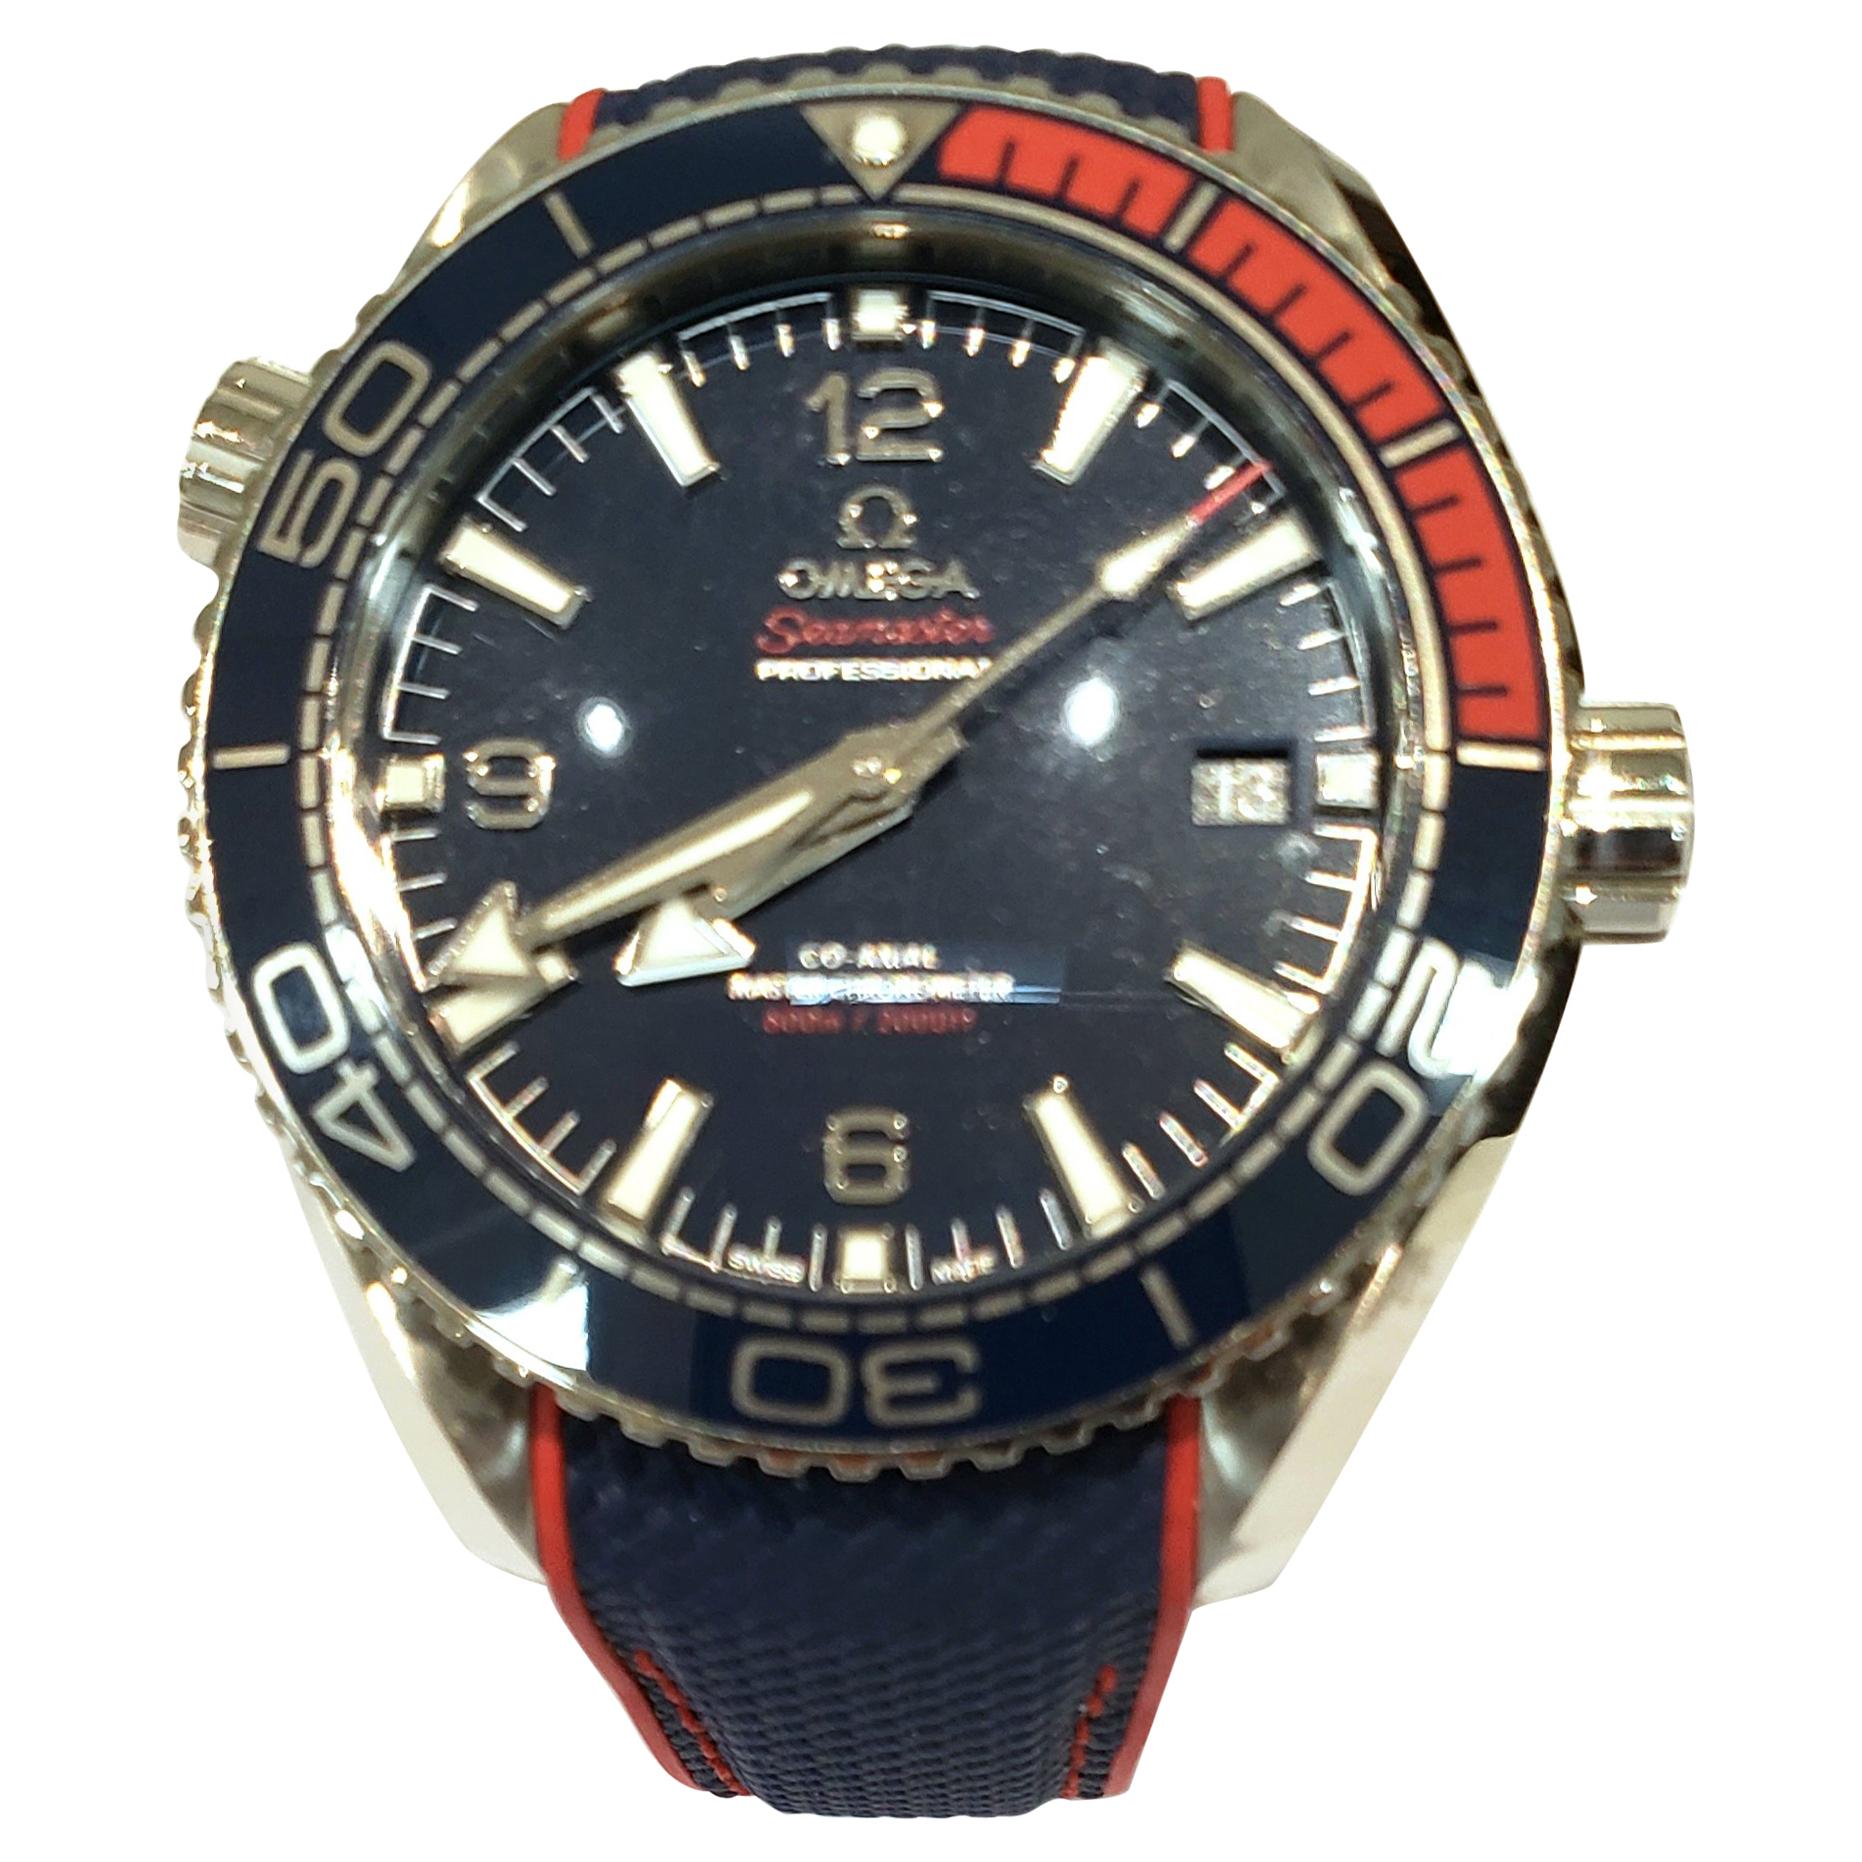 Limited Edition Omega Sea Master Planet Ocean 2018 Olympic Games Watch For Sale